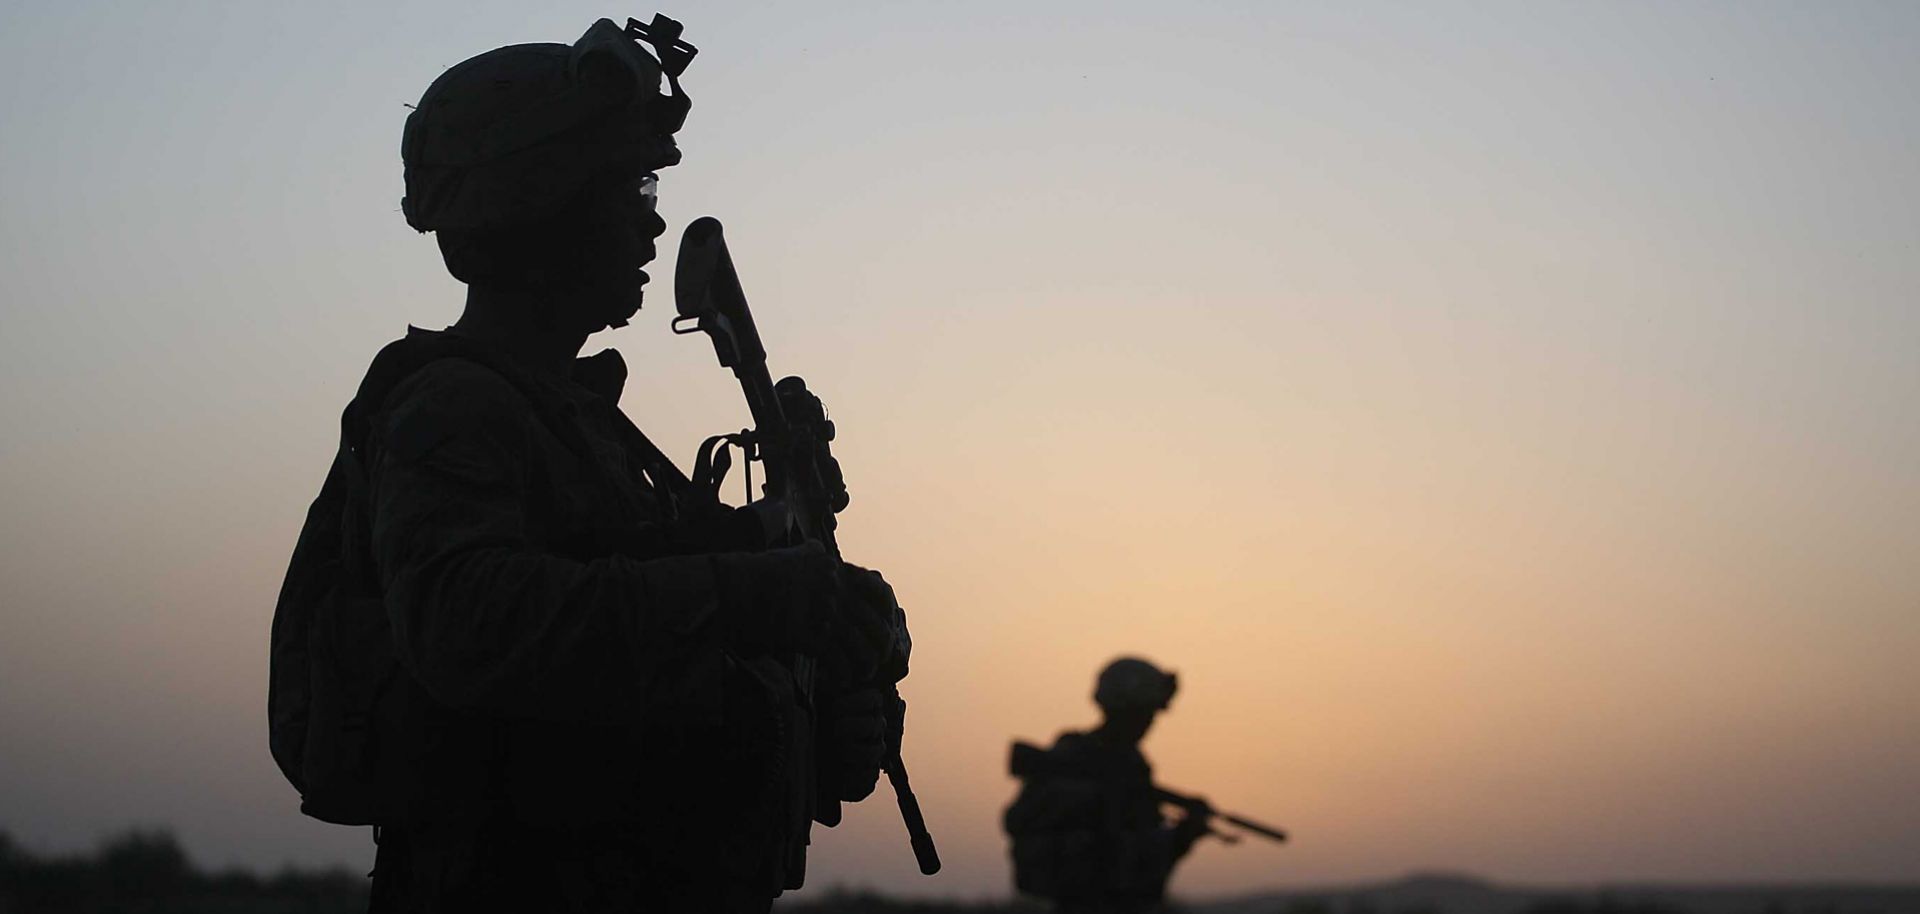 U.S. Marines with the 2nd Marine Expeditionary Brigade, RCT 2nd Battalion 8th Marines Echo Co. step off in the early morning during an operation to push out Taliban fighters on July 18, 2009 in Herati, Afghanistan . The Marines met no resistance during the operatoin. The Marines are part of Operation Khanjari which was launched to take areas in the Southern Helmand Province that Taliban fighters are using as a resupply route and to help the local Afghan population prepare for the upcoming presidential elect